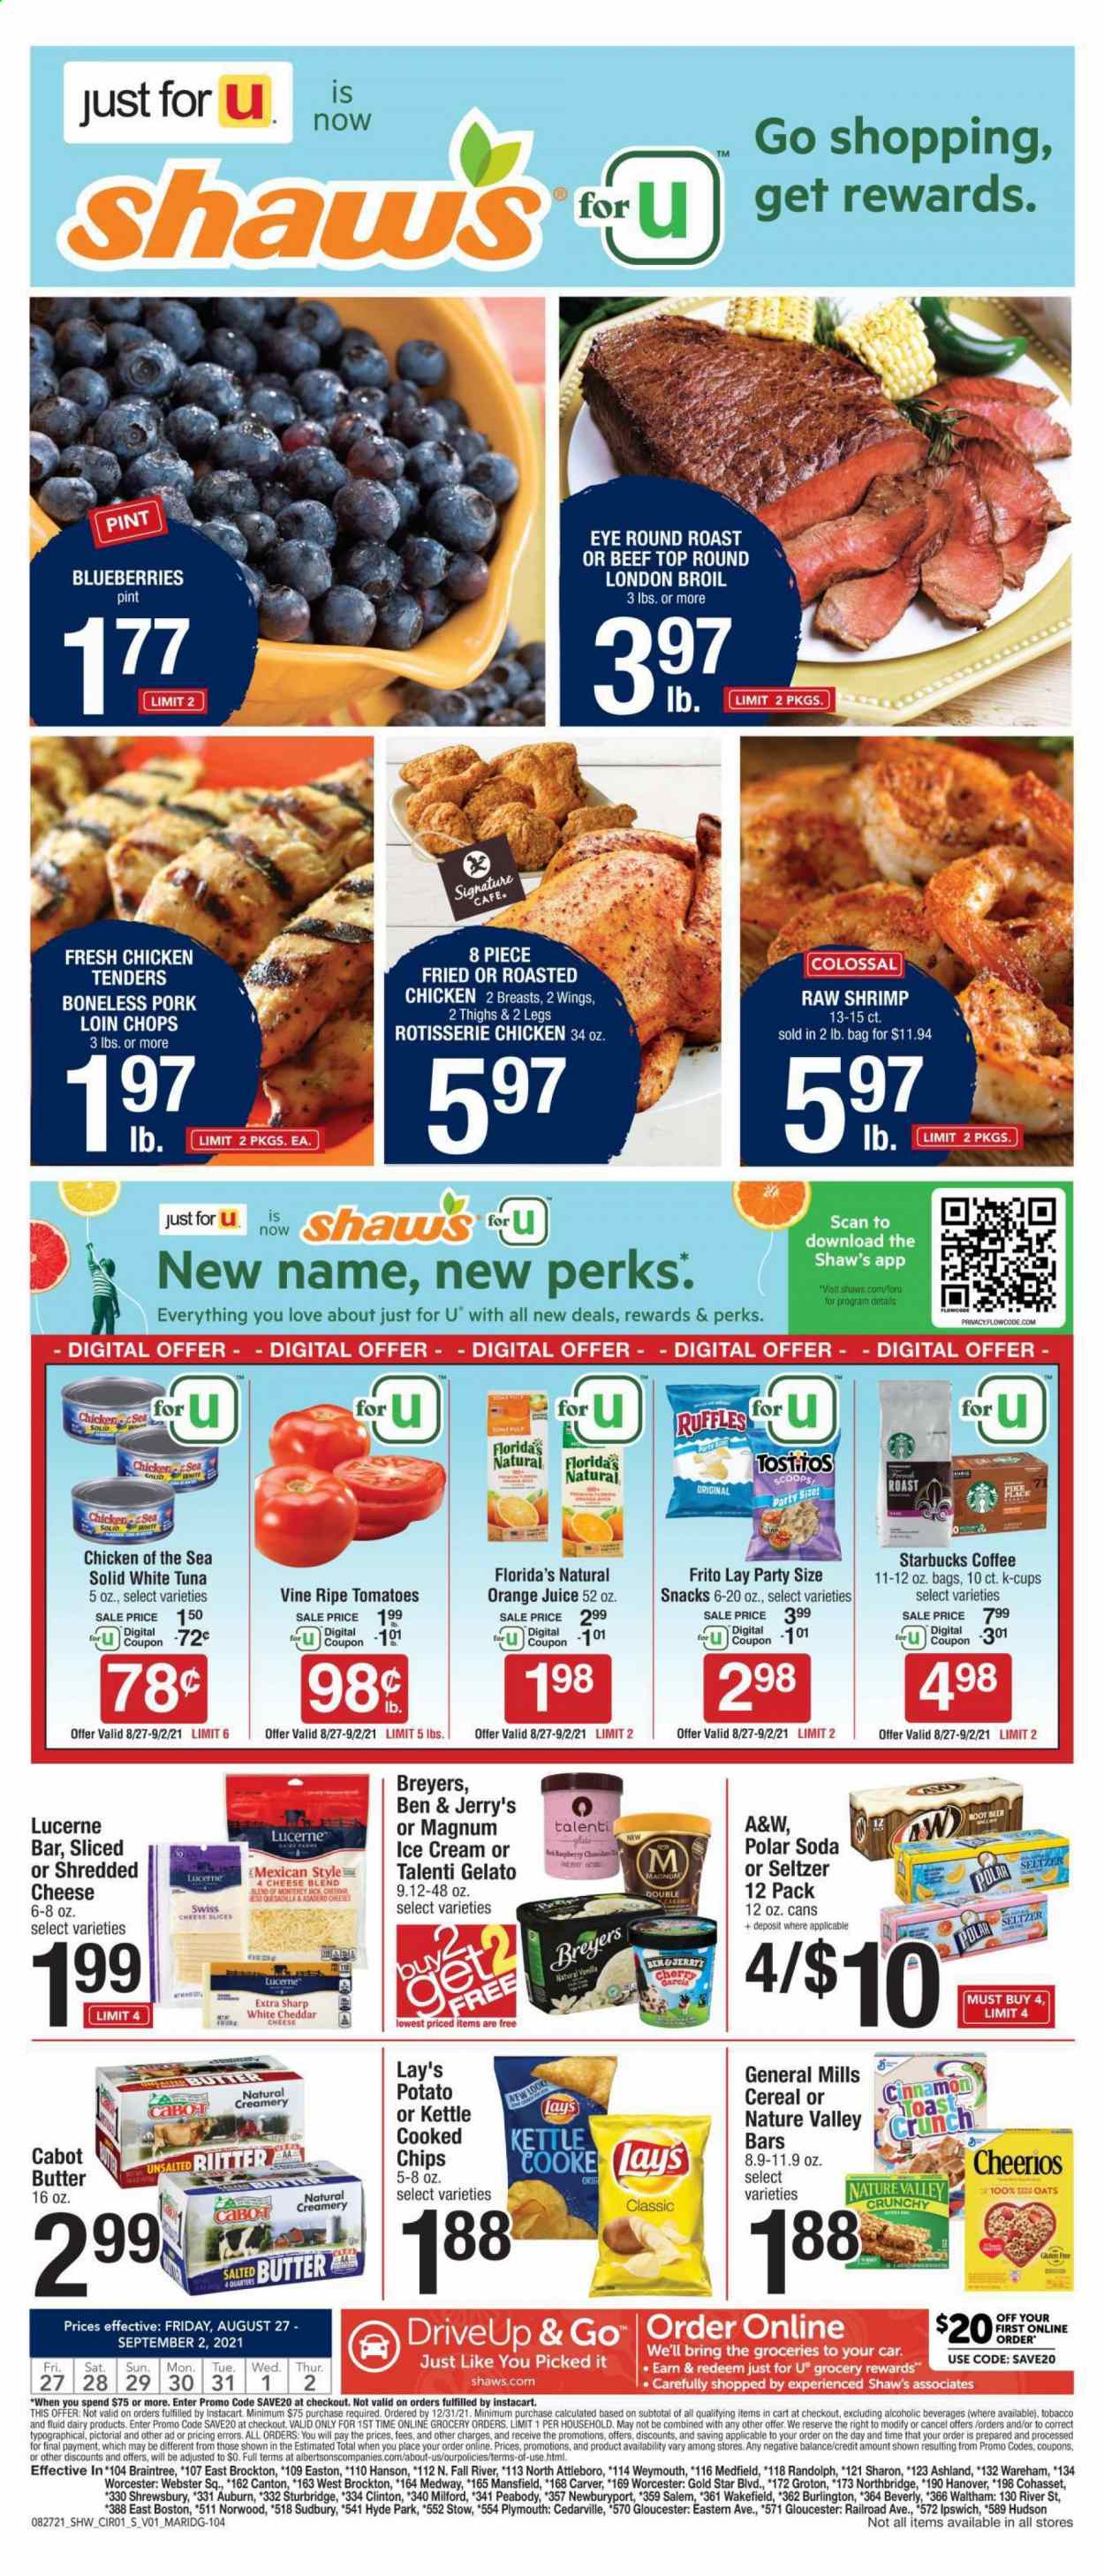 thumbnail - Shaw’s Flyer - 08/27/2021 - 09/02/2021 - Sales products - tomatoes, blueberries, tuna, shrimps, chicken roast, chicken tenders, Monterey Jack cheese, shredded cheese, sliced cheese, butter, suet, salted butter, ice cream, Ben & Jerry's, Talenti Gelato, gelato, snack, Florida's Natural, chips, Lay’s, Ruffles, Tostitos, oats, Chicken of the Sea, cereals, Cheerios, Nature Valley, cinnamon, orange juice, juice, A&W, seltzer water, soda, coffee, Starbucks, coffee capsules, K-Cups, beer, beef meat, round roast, pork chops, pork loin, pork meat. Page 1.